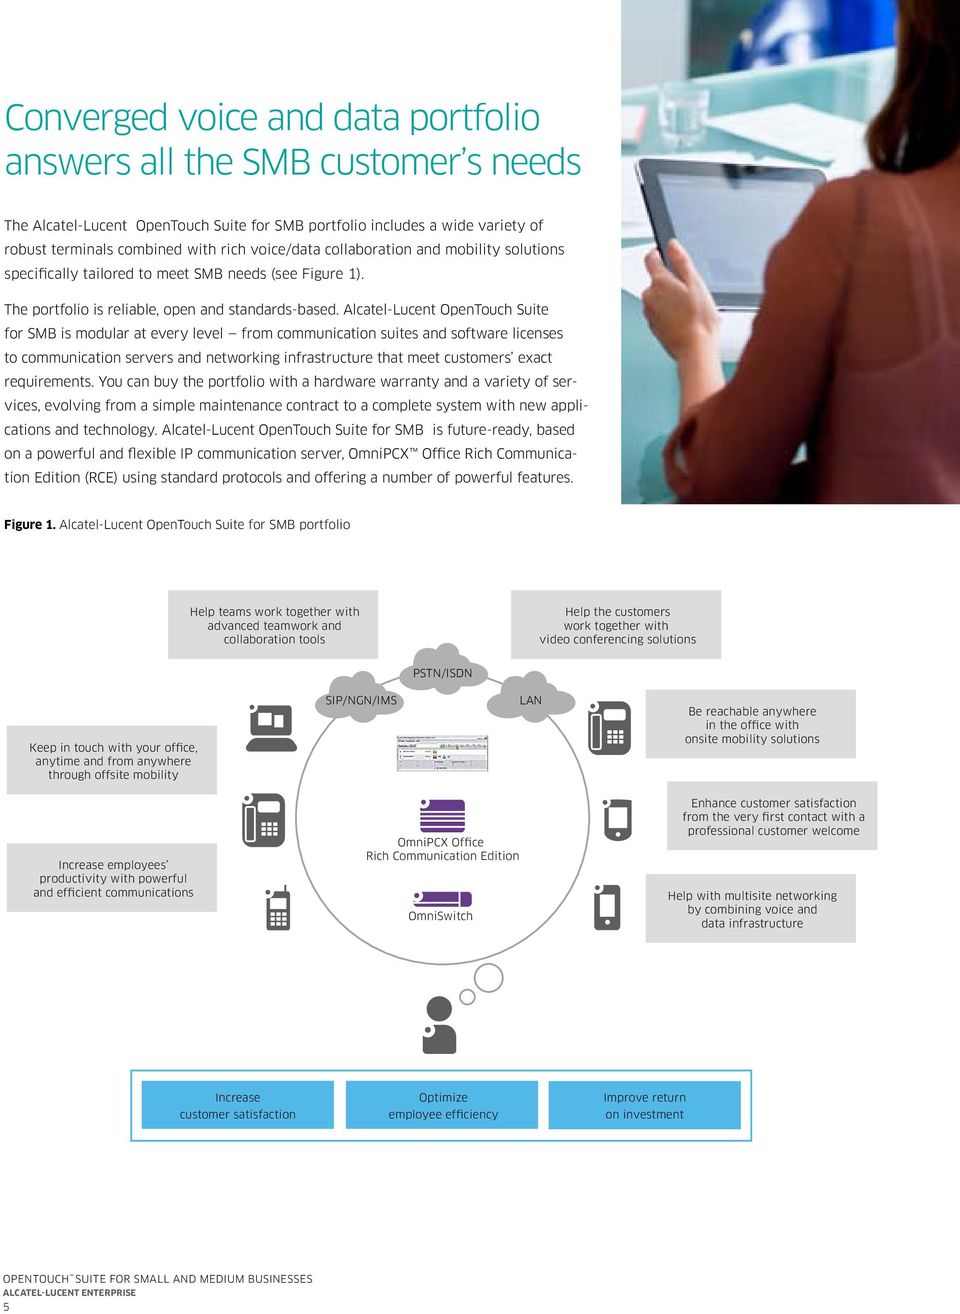 Alcatel-Lucent OpenTouch Suite for SMB is modular at every level from communication suites and software licenses to communication servers and networking infrastructure that meet customers exact